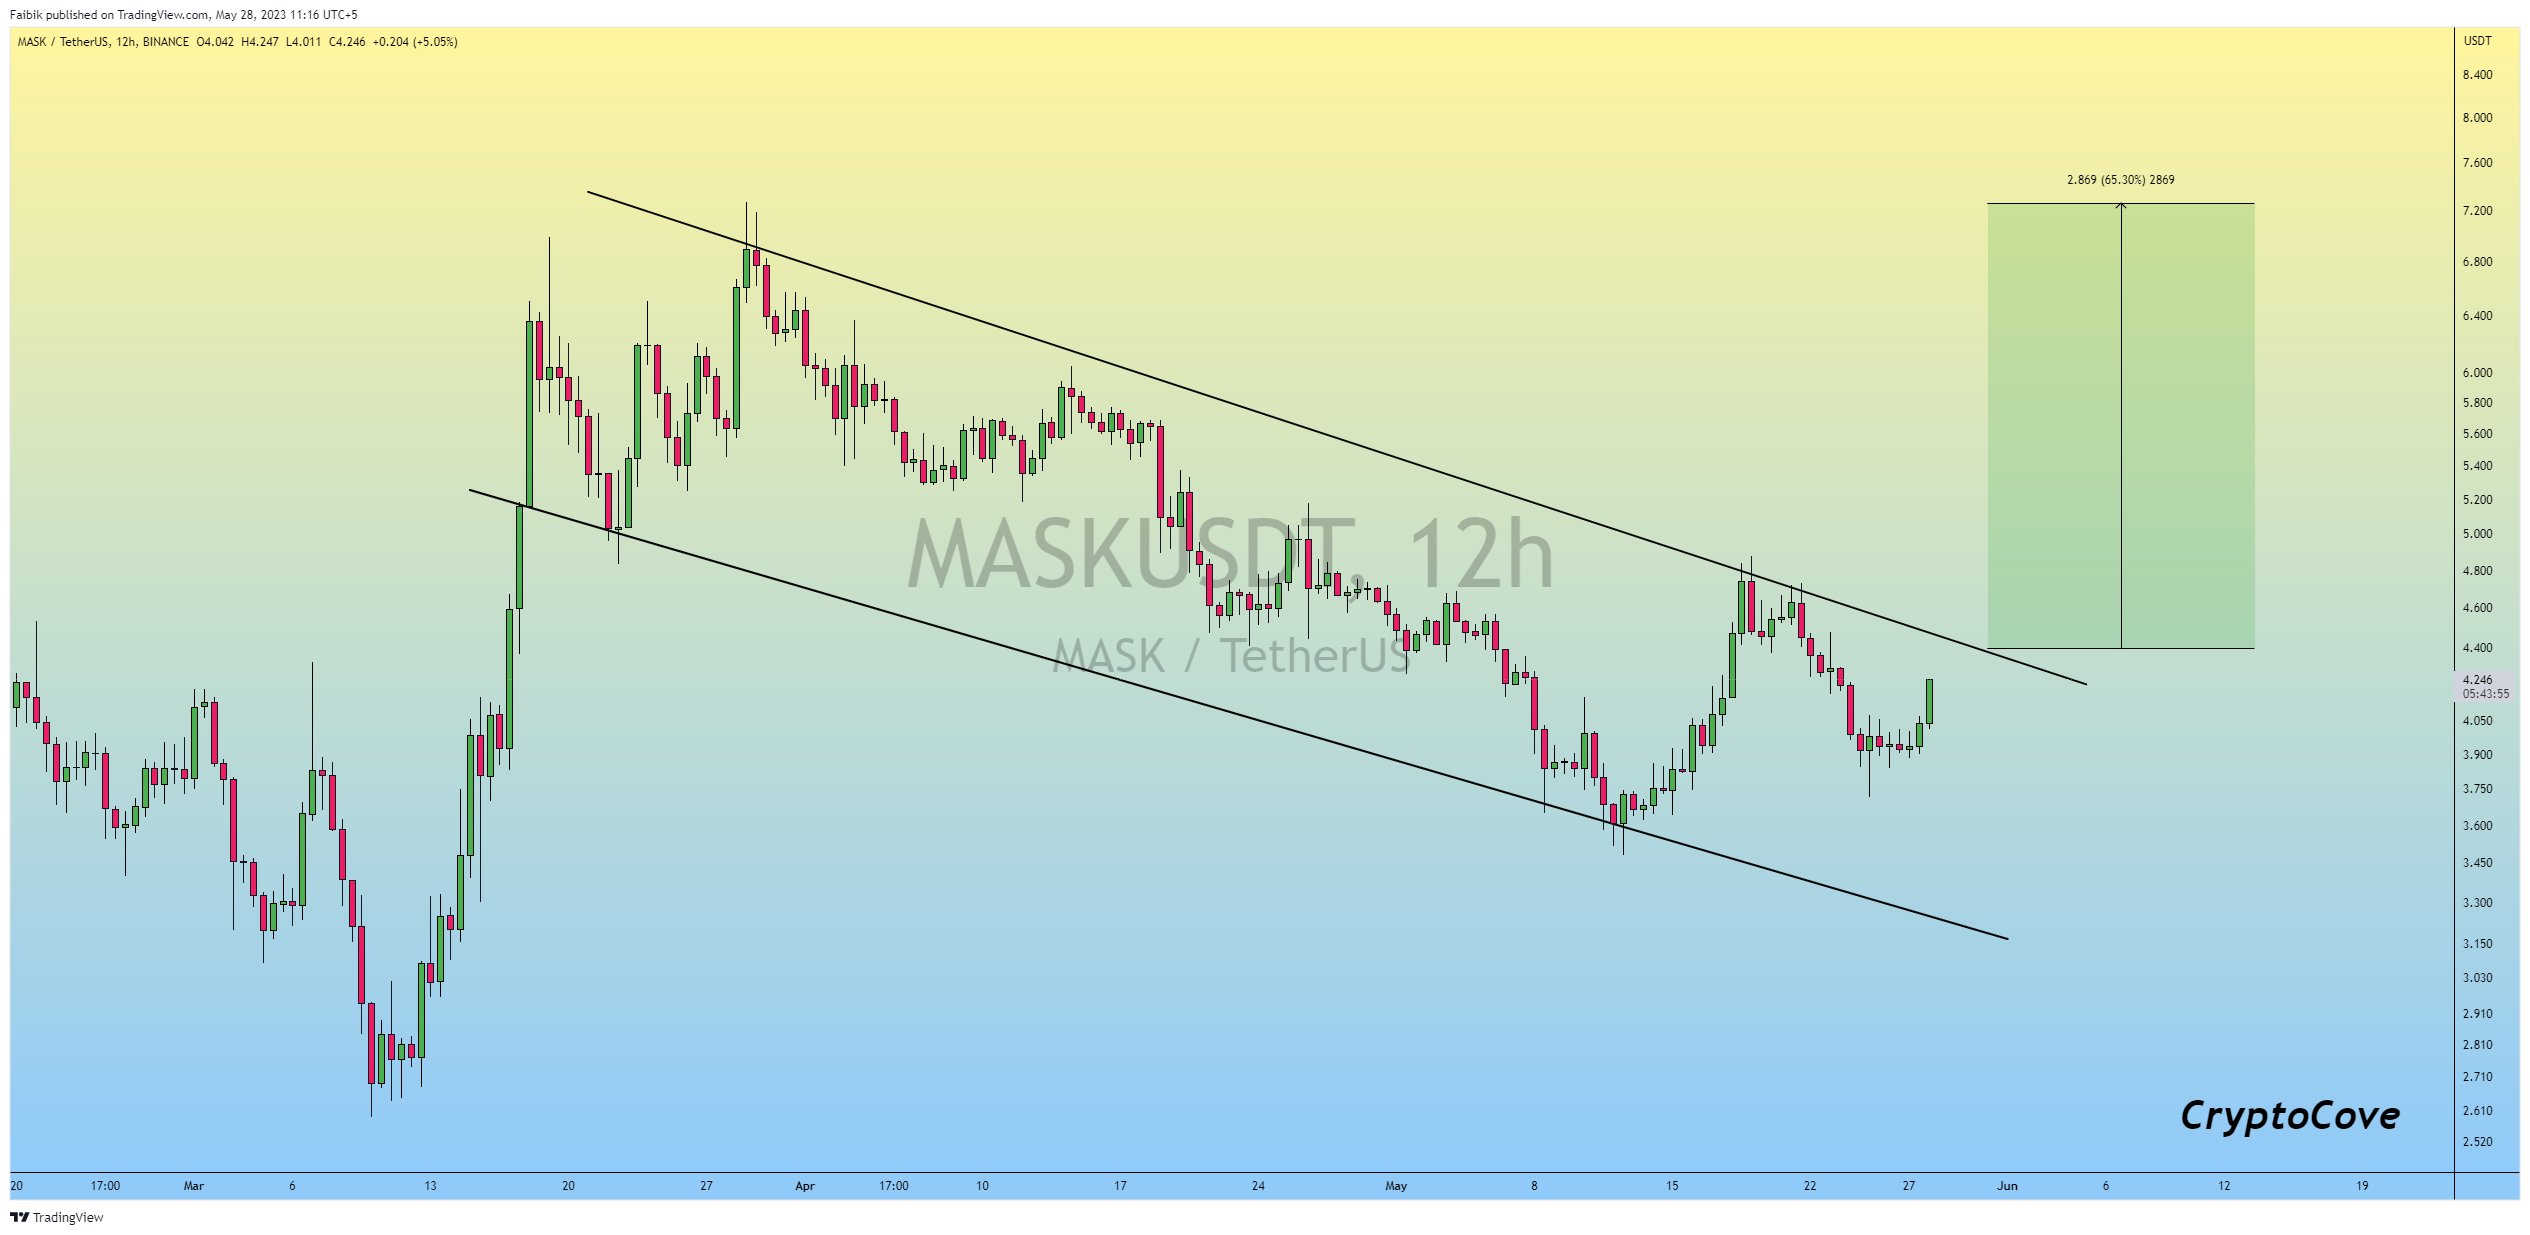 Mask Network (MASK) price is up 10% today: Heres why